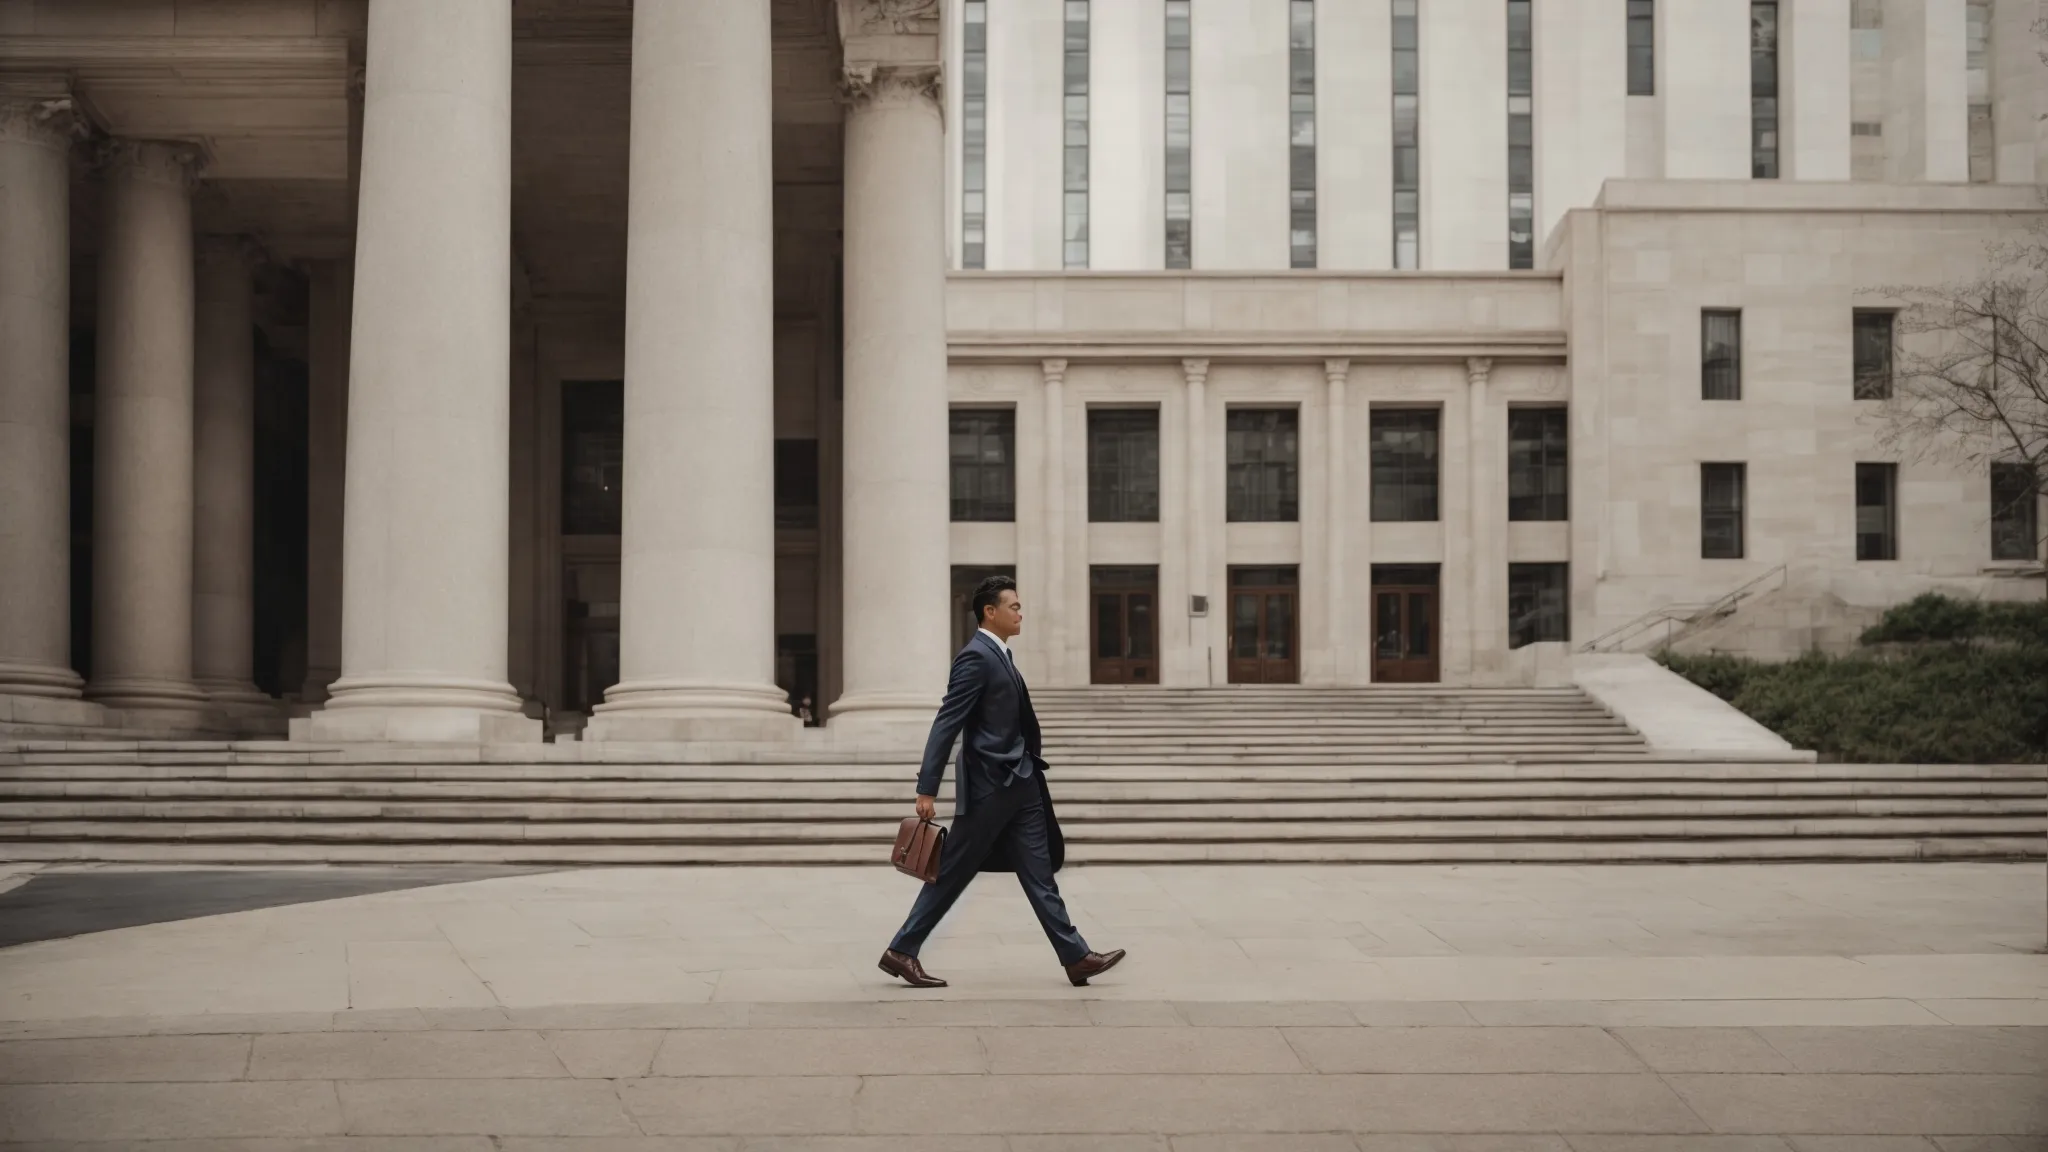 a plaintiff confidently strides towards an imposing courthouse, signifying the beginning of a legal challenge.